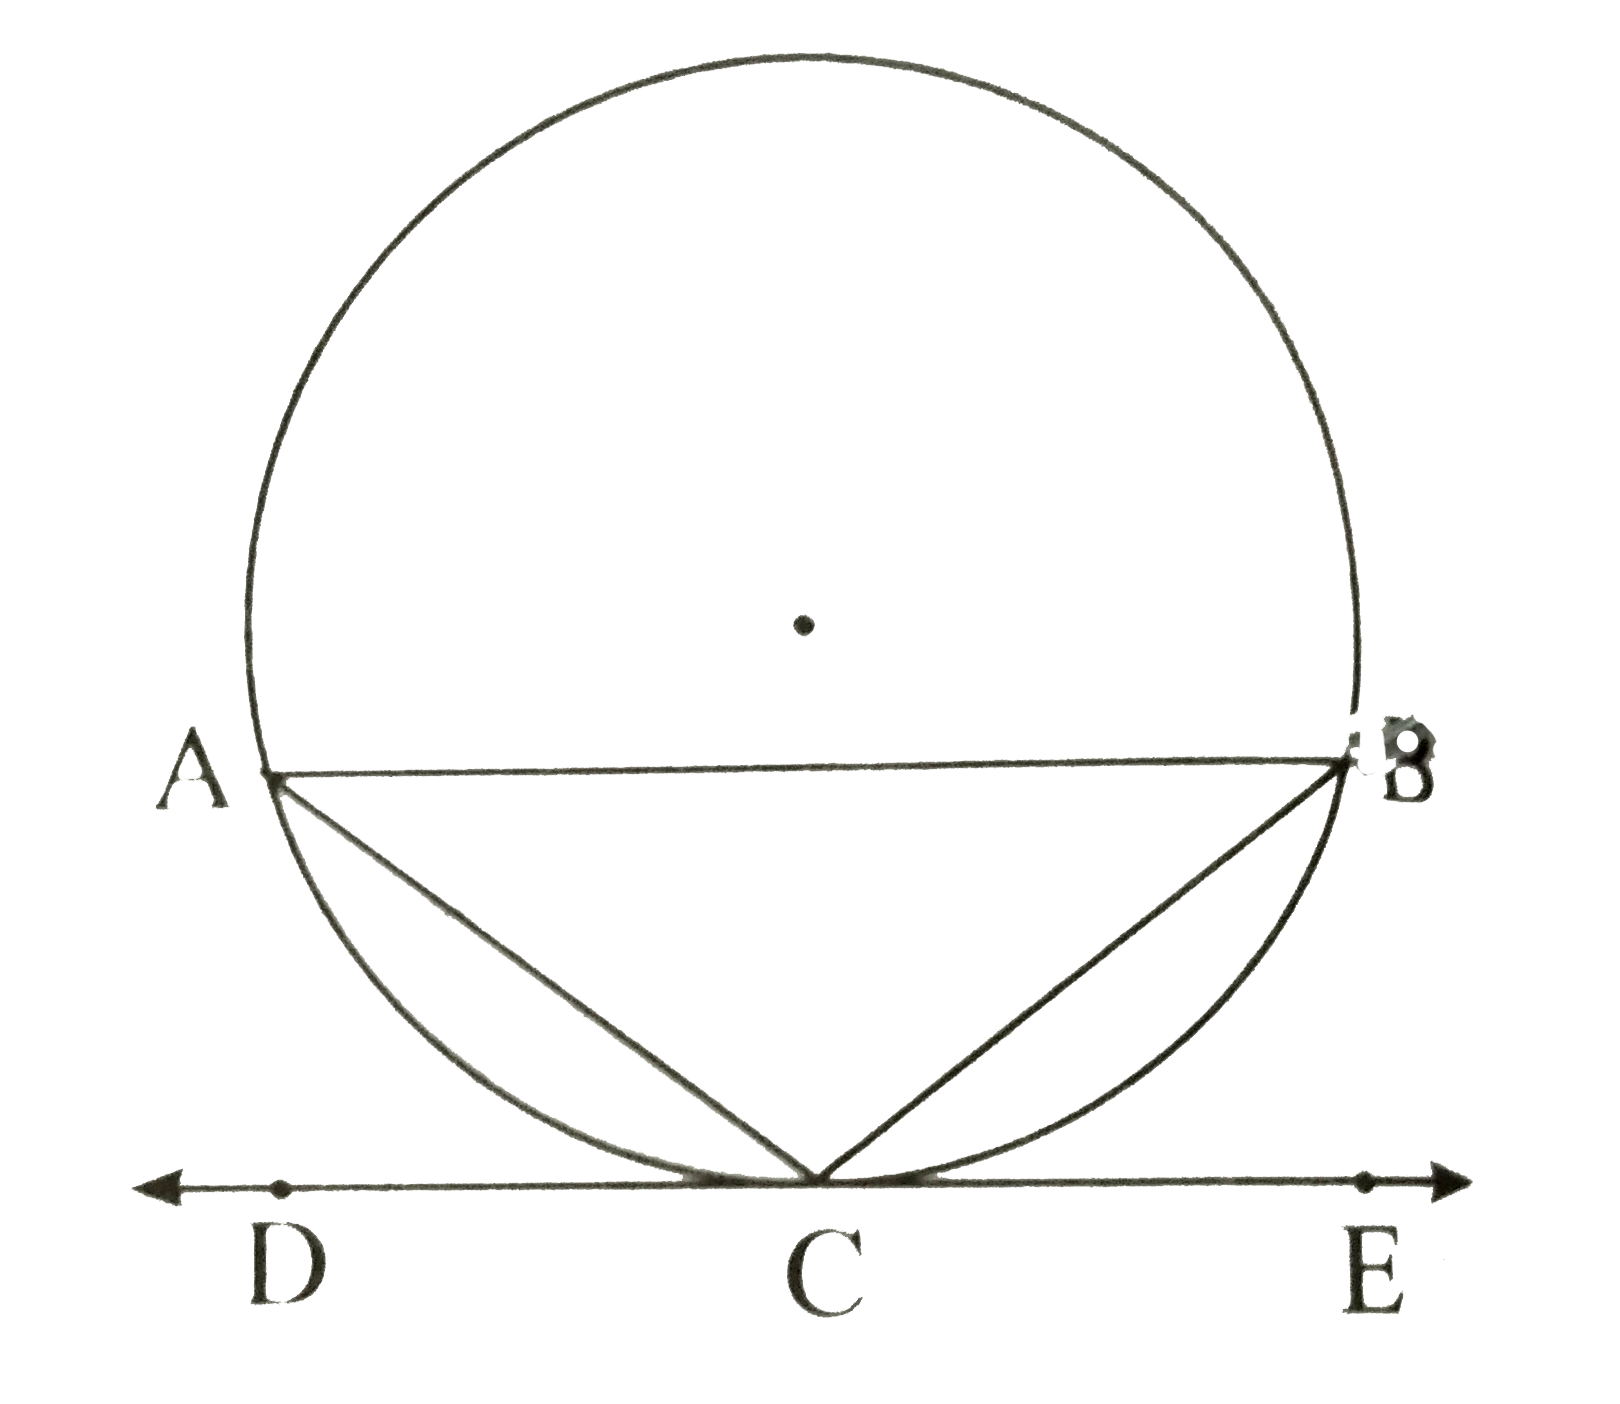 In the figure, chord AB  || tangent DE. Tangent DE touches the circle at point C then prove AC = BC.